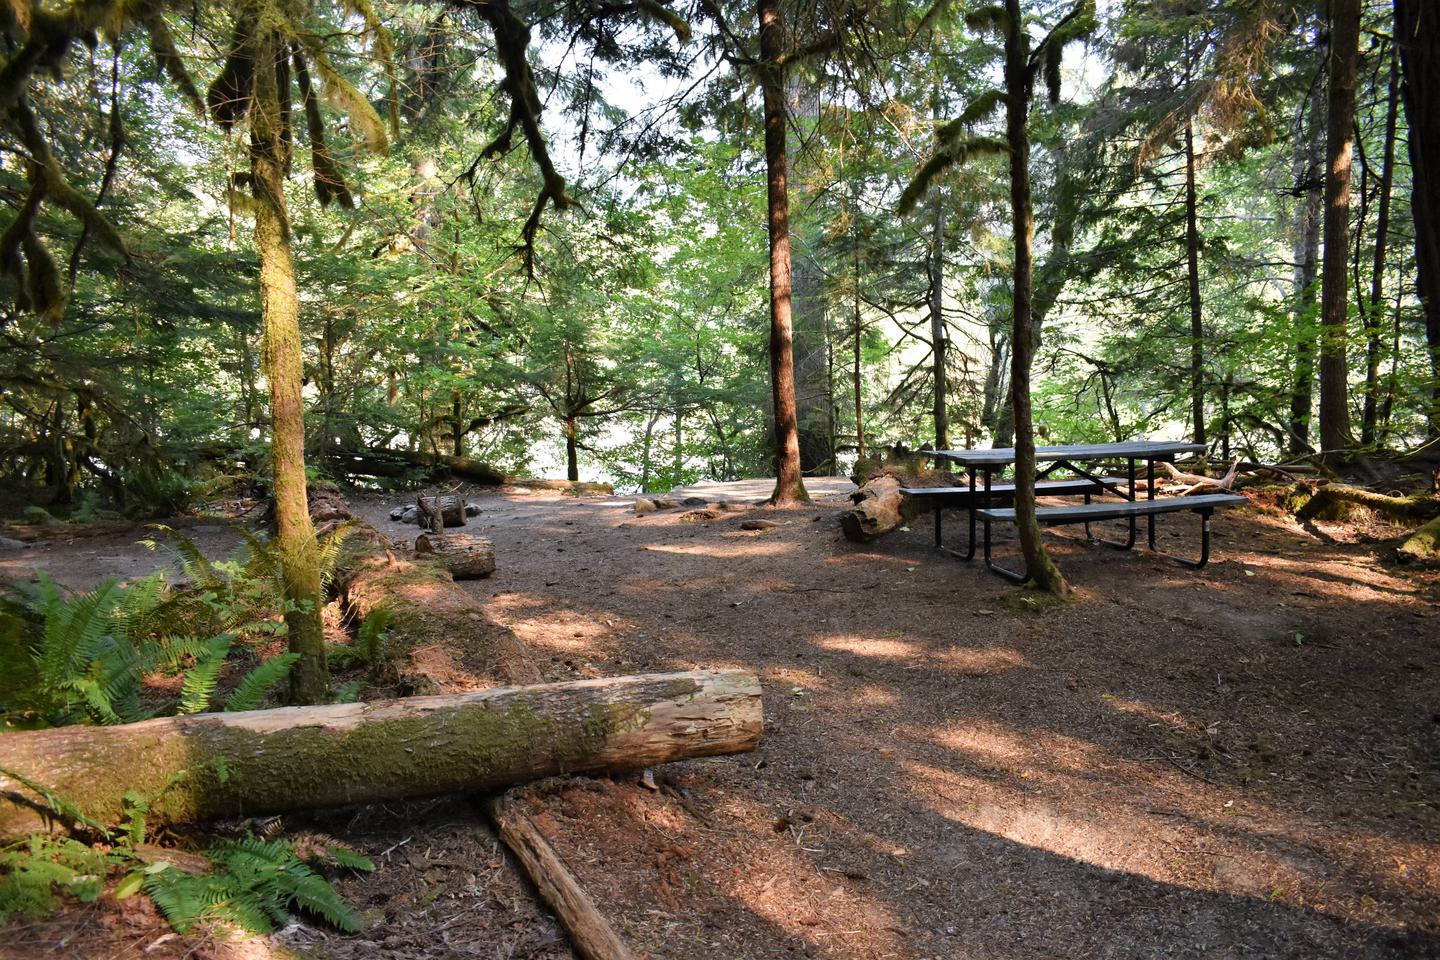 Fire ring, tent pad, and picnic table with river in distanceView of campsite